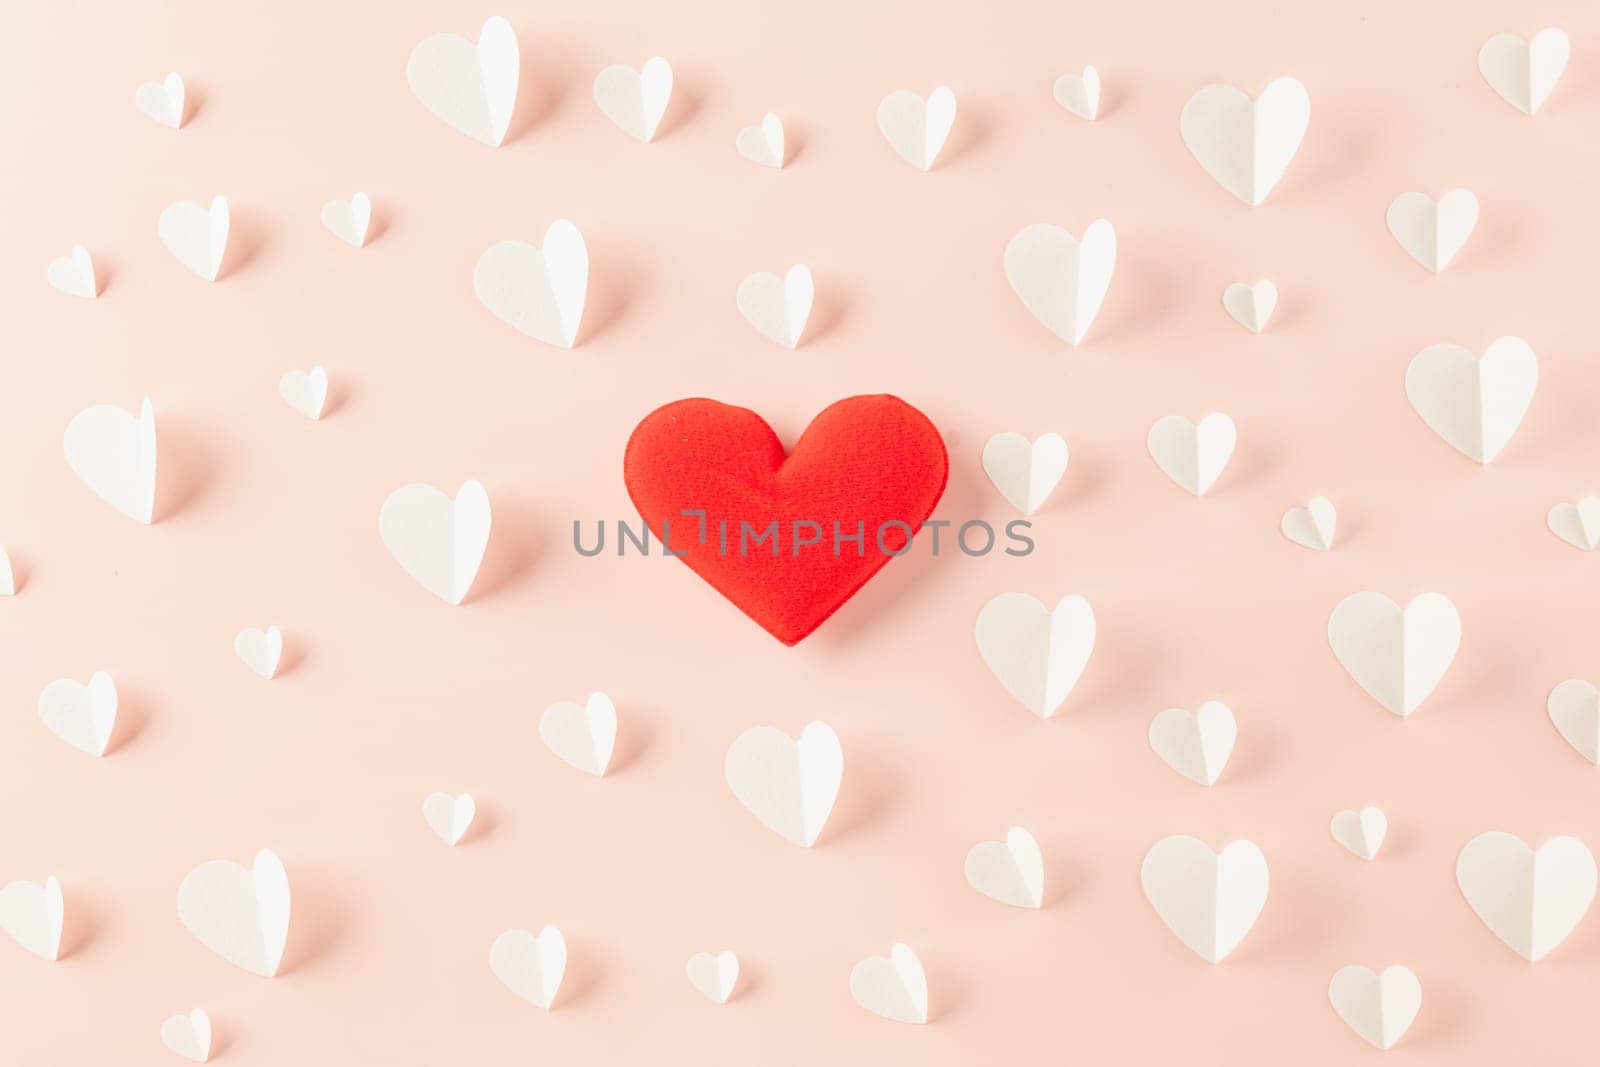 Happy Valentines Day background. Top view flat lay of paper elements cutting white hearts shape flying on pink background with copy space, Happy Mother's Day, Banner template design of holiday